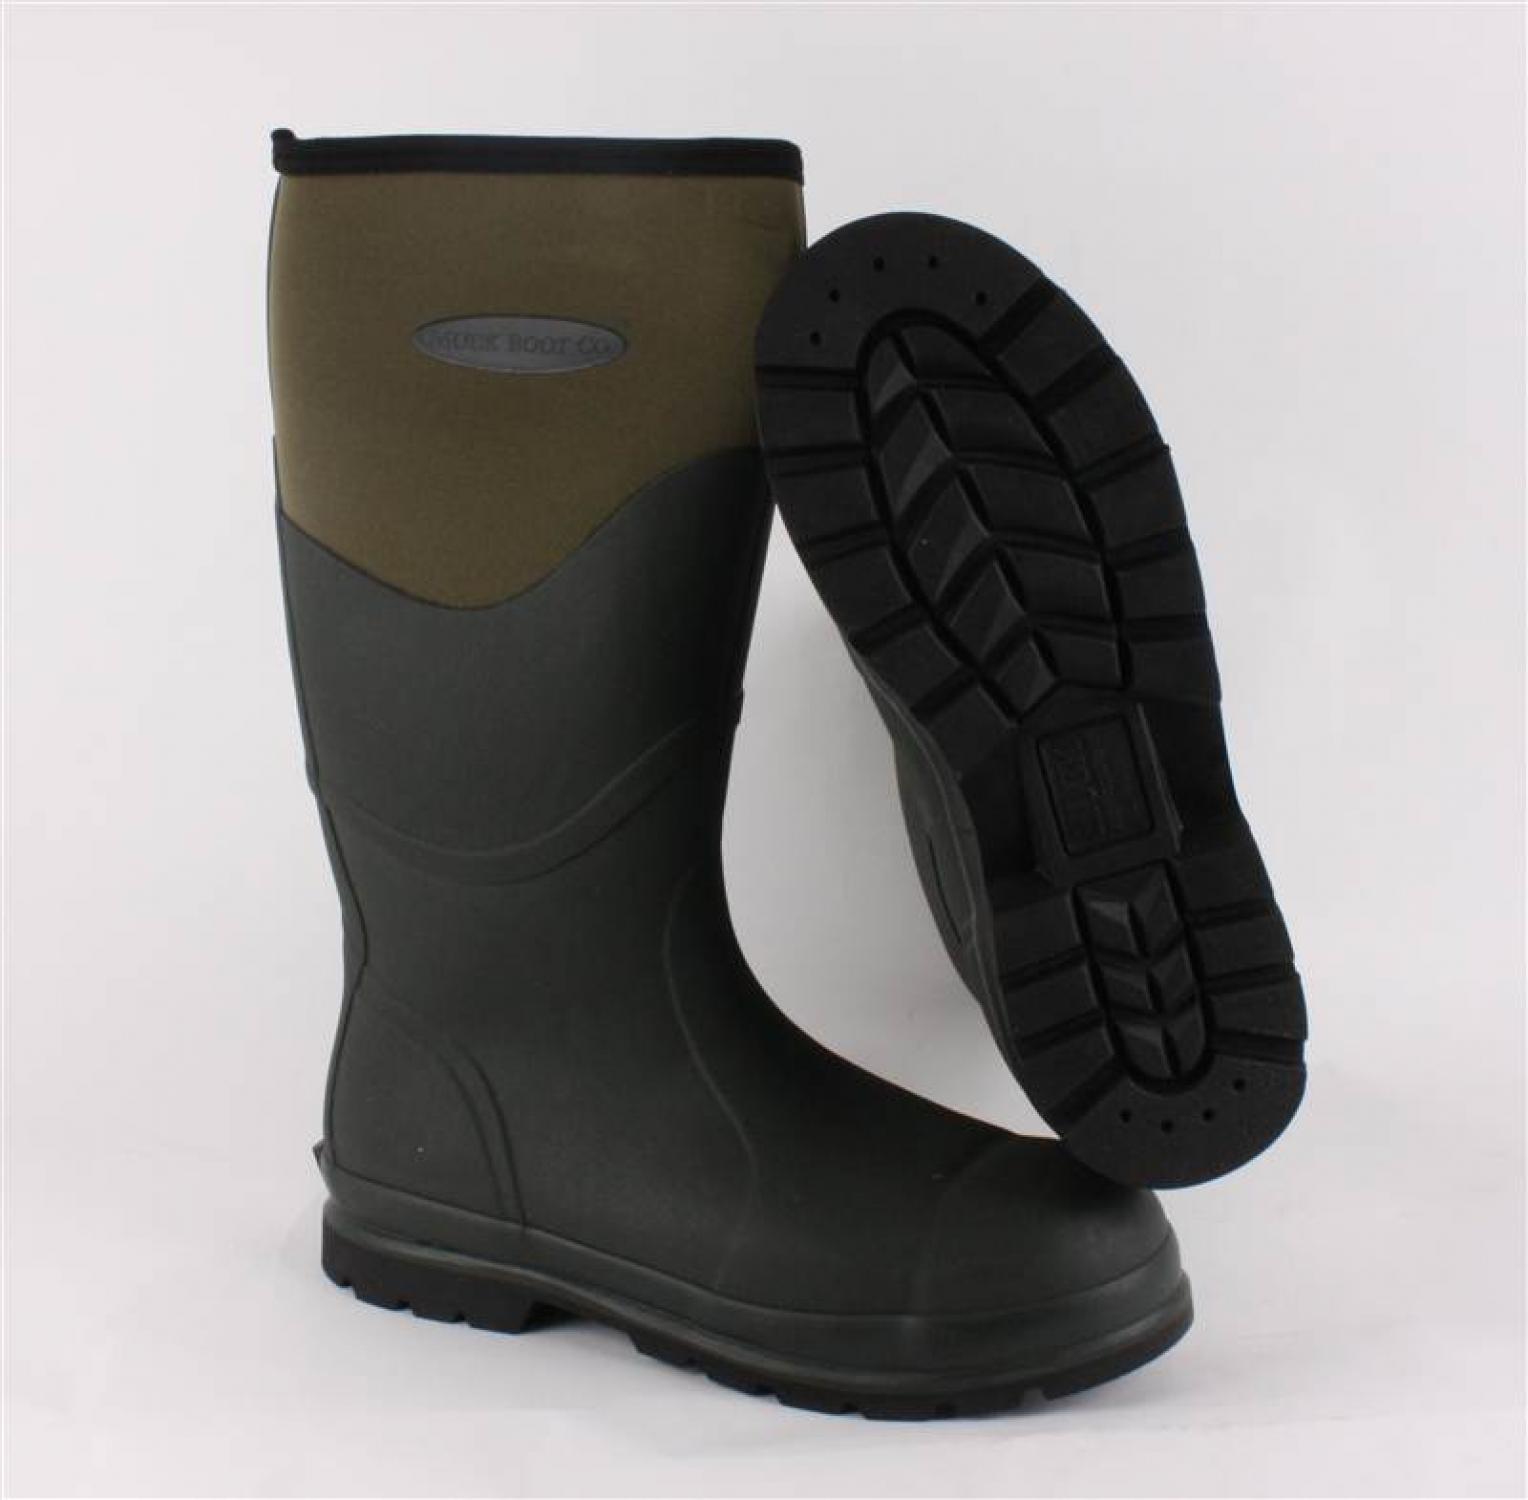 Buy Chore Steel Toe Safety Muck Boot Green from Fane Valley Stores ...